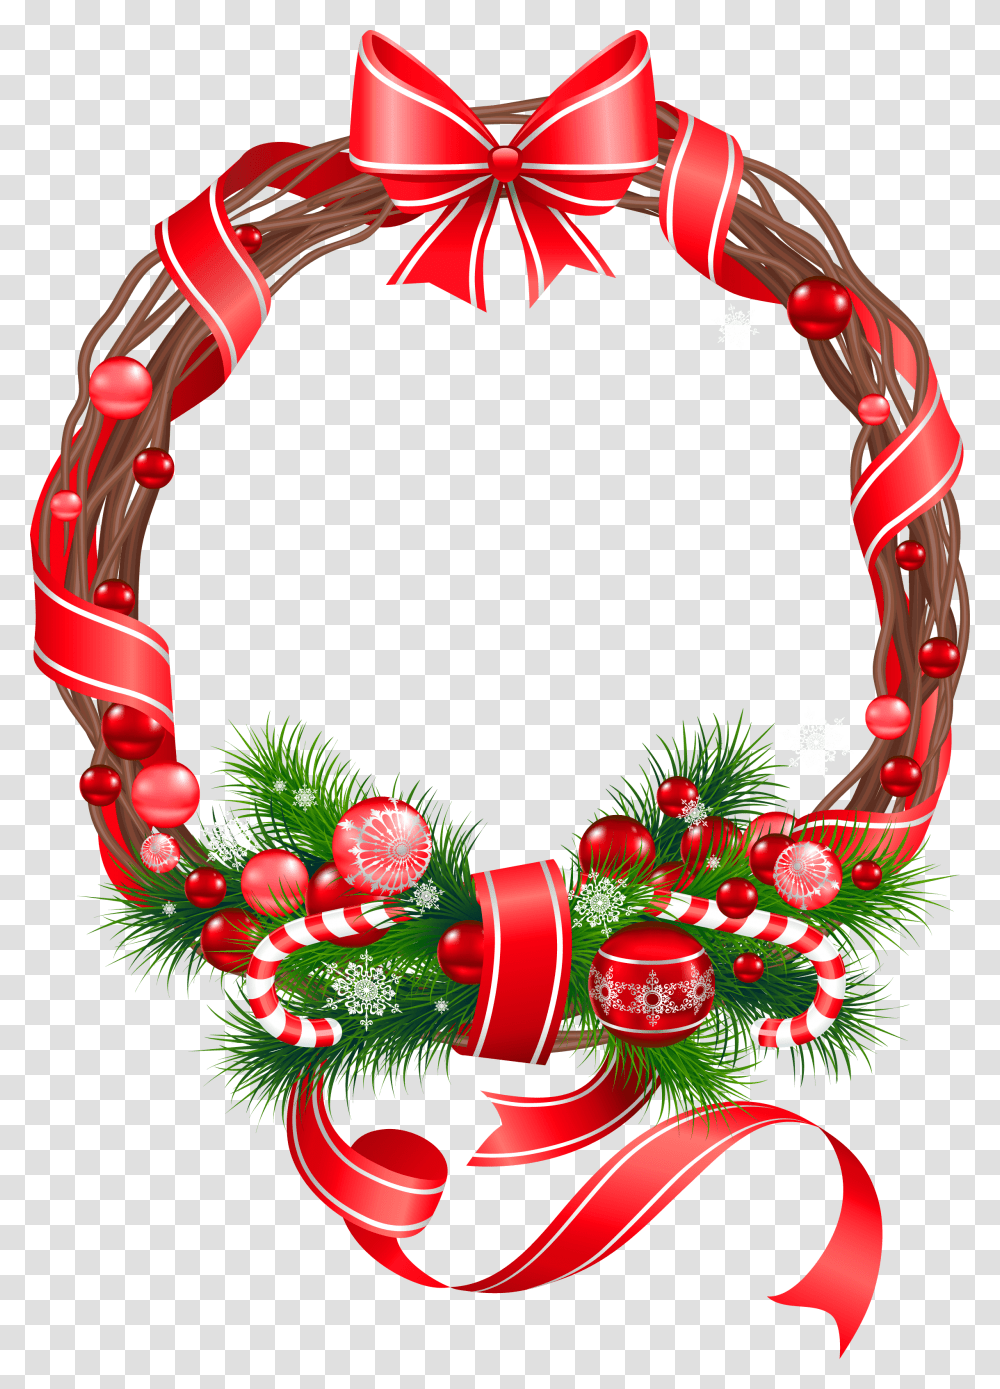 Cool In Color Wreath Holiday Wreath G Wreath Wreath, Floral Design, Pattern Transparent Png